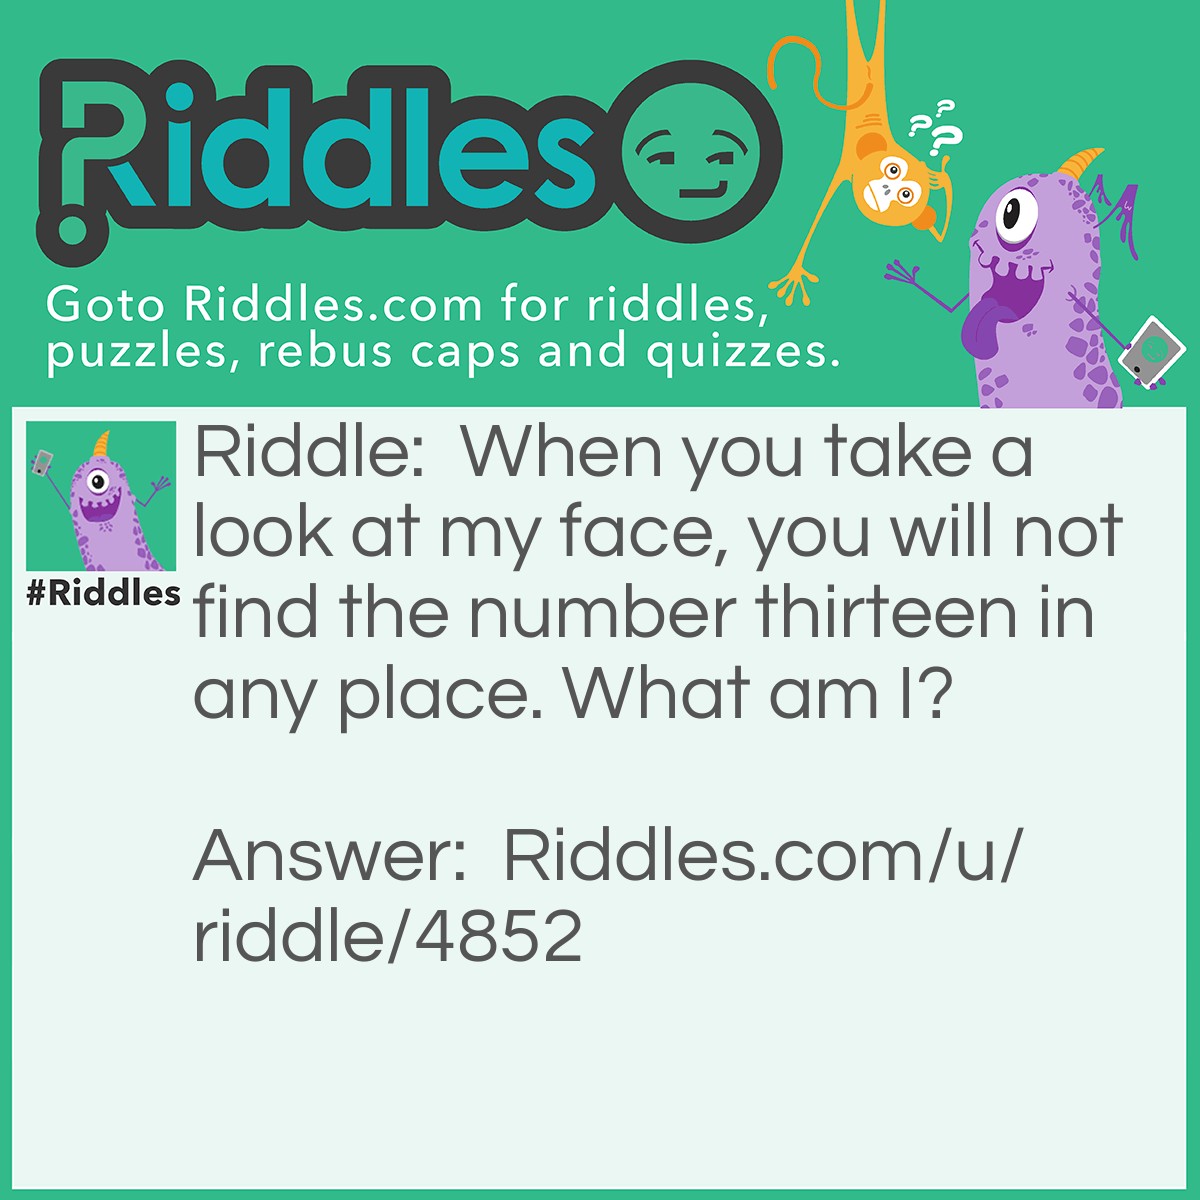 Riddle: When you take a look at my face, you will not find the number thirteen in any place. What am I? Answer: A clock.